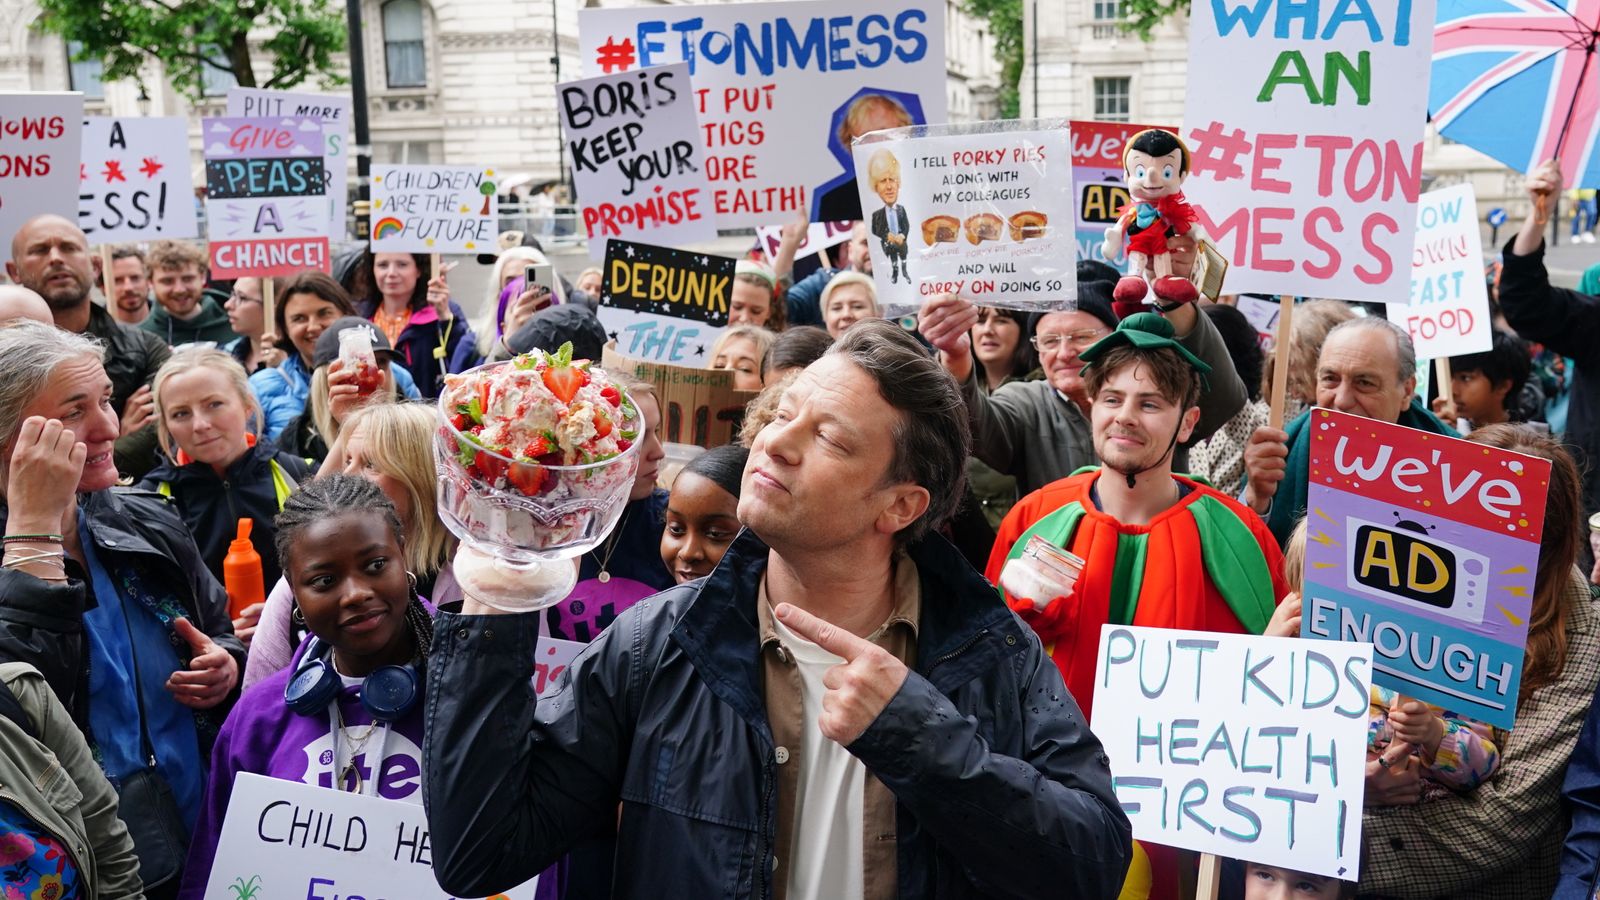 Jamie Oliver accuses PM of using cost of living crisis as an ‘excuse’ for not tackling obesity | Politics News